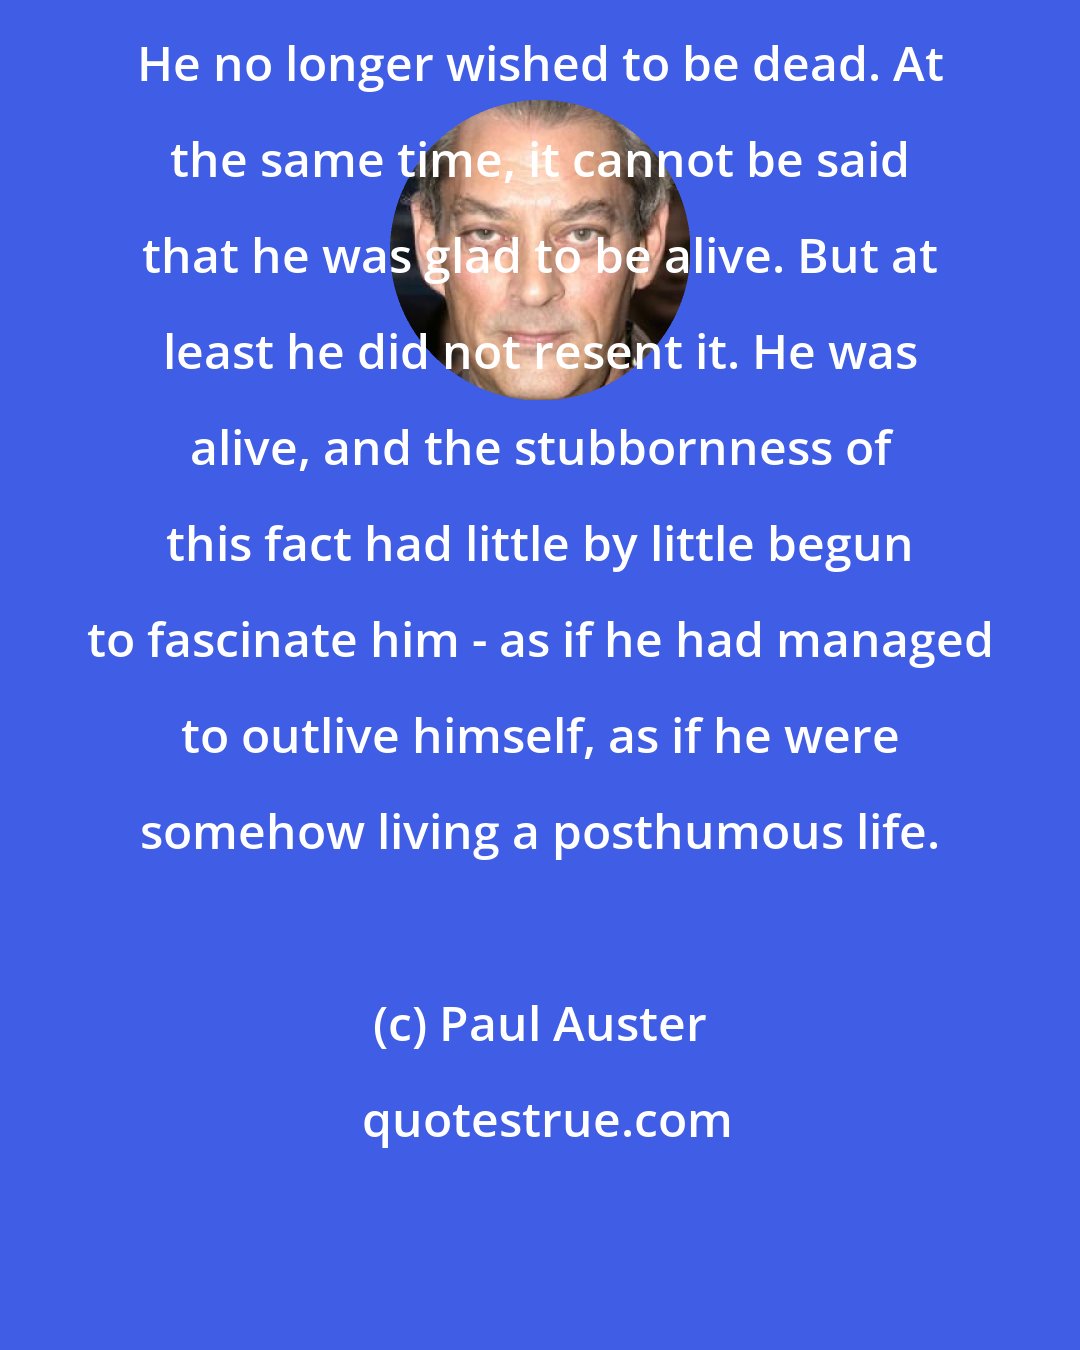 Paul Auster: He no longer wished to be dead. At the same time, it cannot be said that he was glad to be alive. But at least he did not resent it. He was alive, and the stubbornness of this fact had little by little begun to fascinate him - as if he had managed to outlive himself, as if he were somehow living a posthumous life.